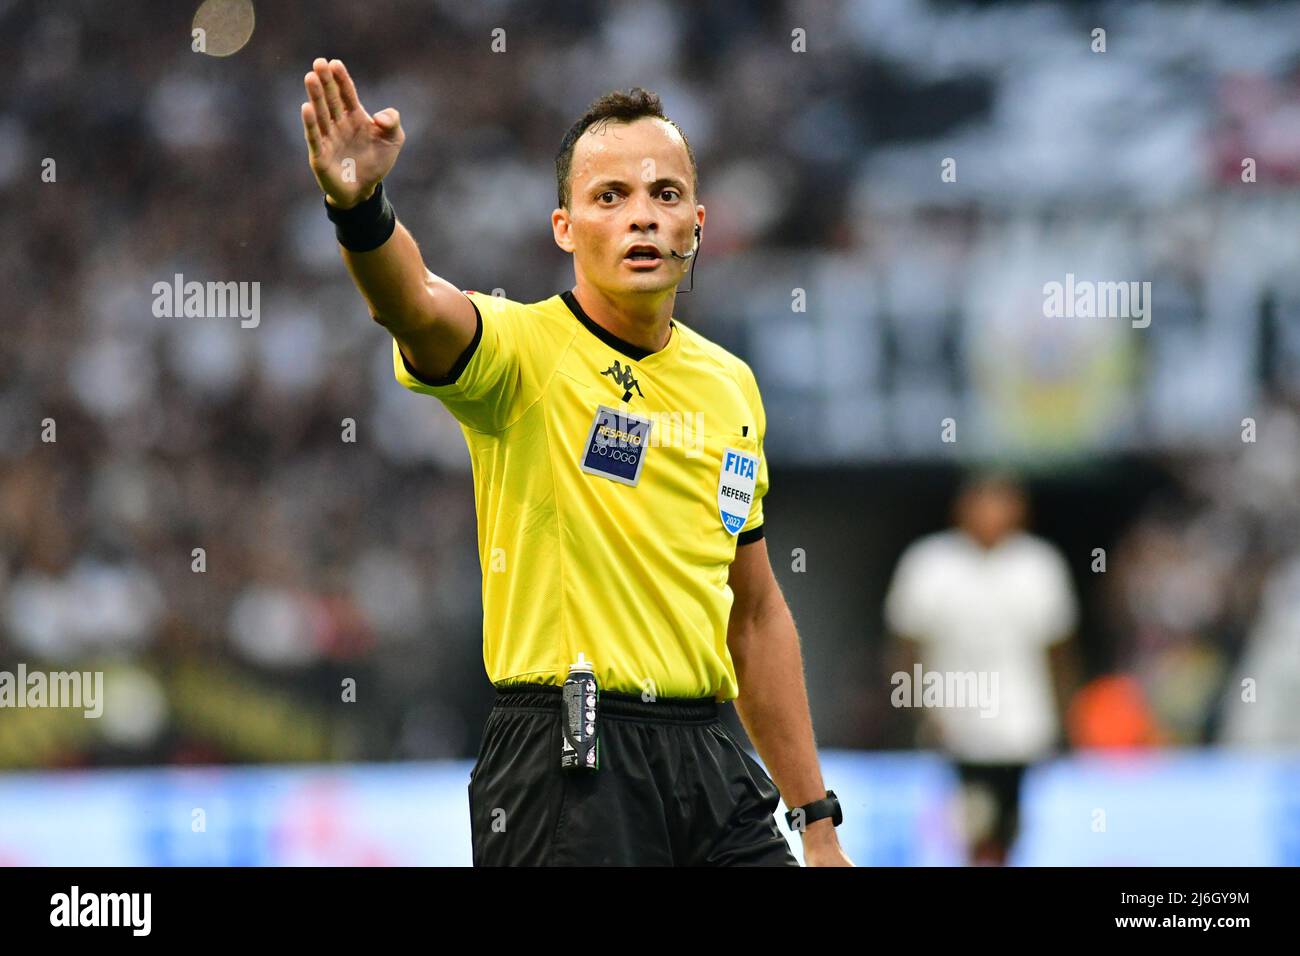 SÃO PAULO, BRASIL - MAY 1: Referee Savio Pereira Sampaio during Campeonato Brasileiro Série A 2022 match between S.C. Corinthians and Fortaleza at Neo Quimica Arena on May 1, 2022 in Sao Paulo, Brazil. (Photo by Leandro Bernardes/PxImages) Stock Photo